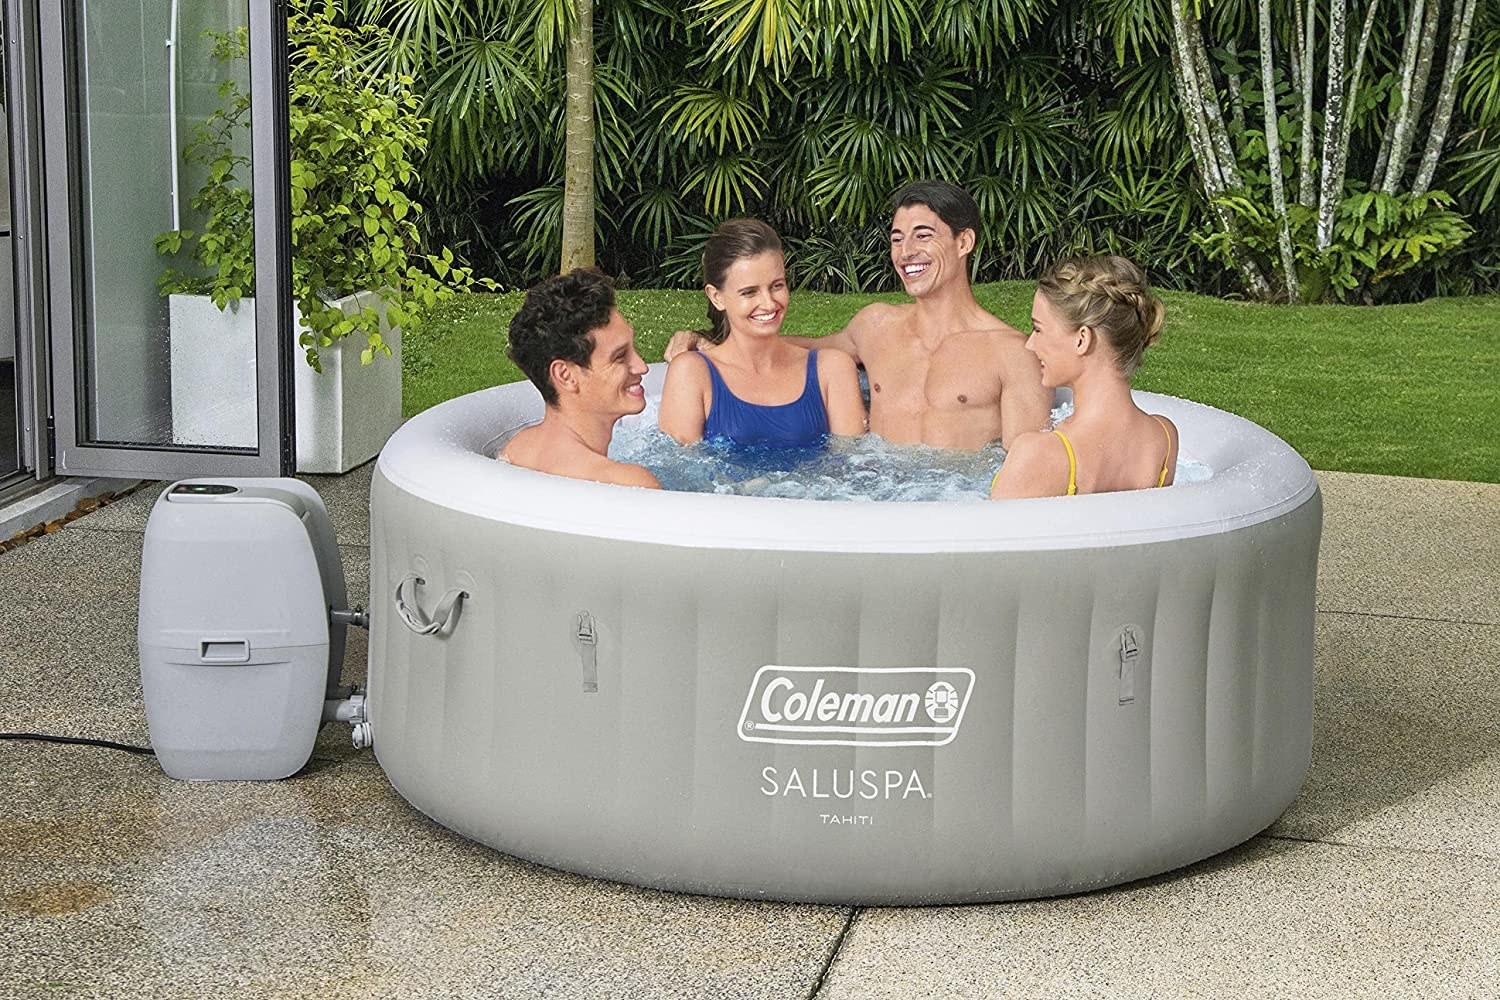 Four models sitting in outdoor inflatable hot tub